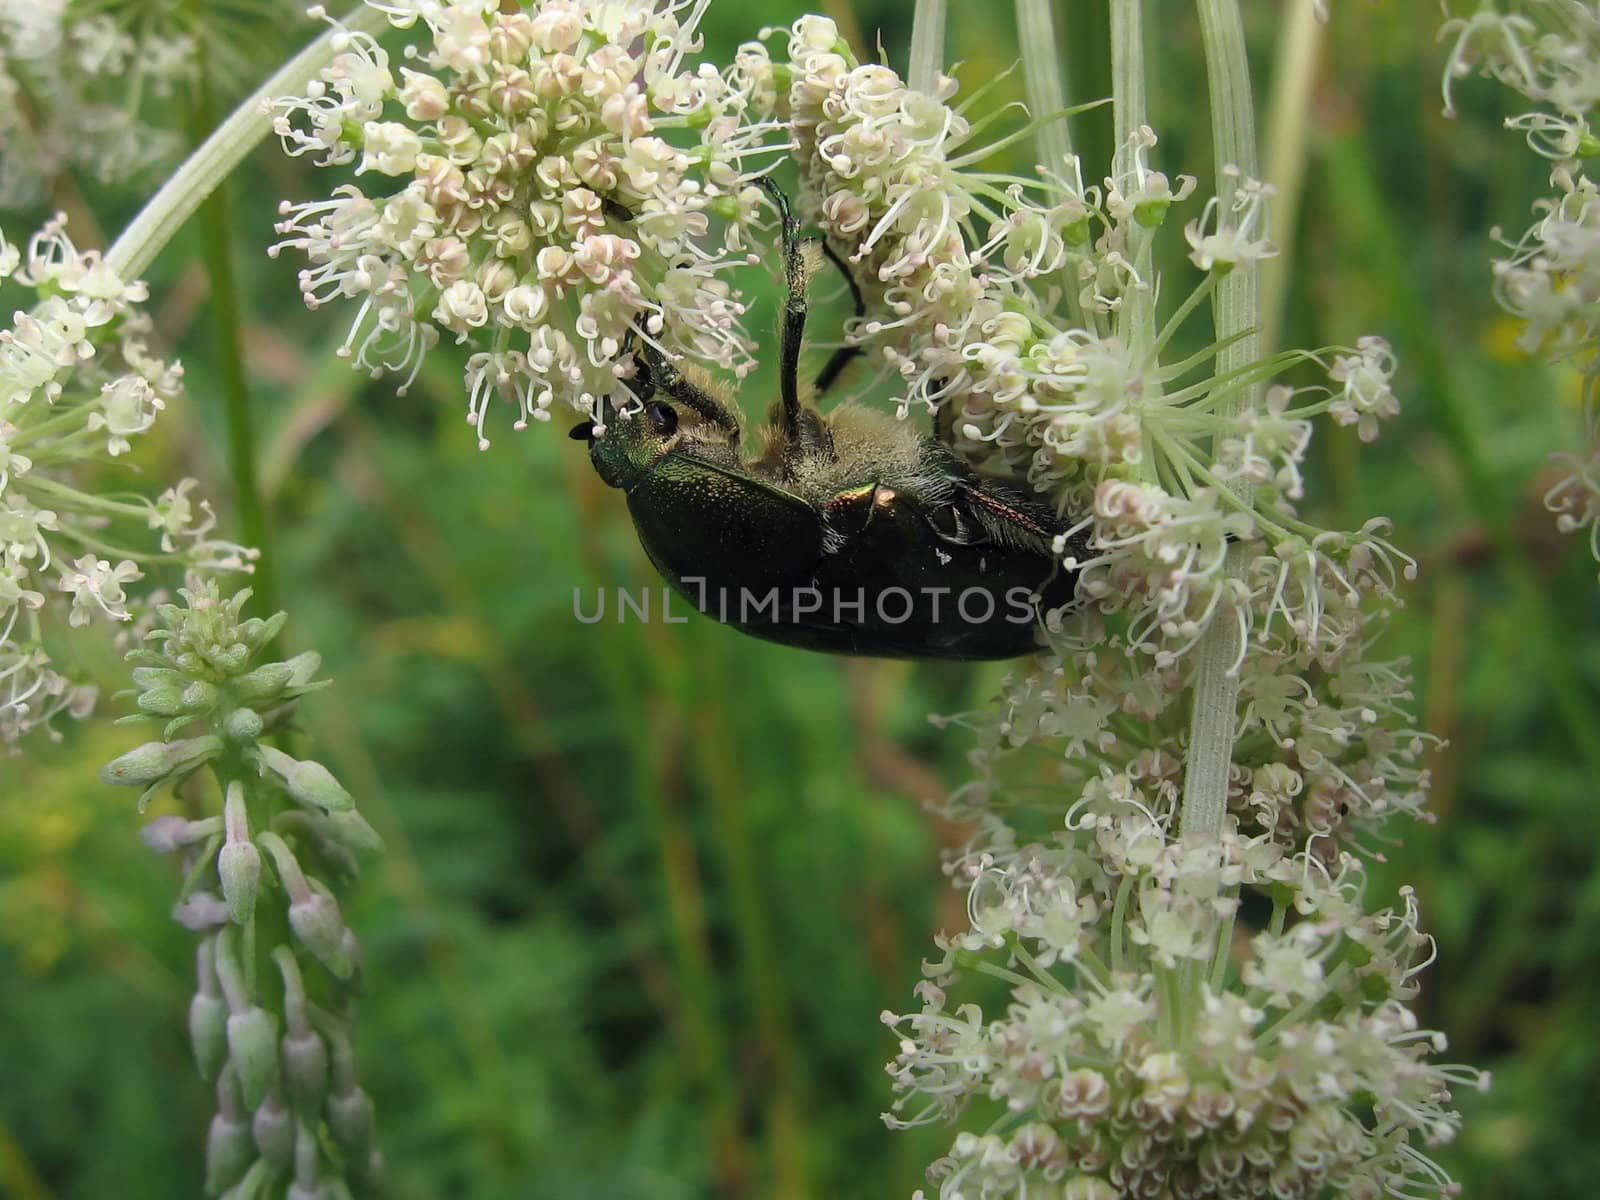 Beetle on white flowers by tomatto